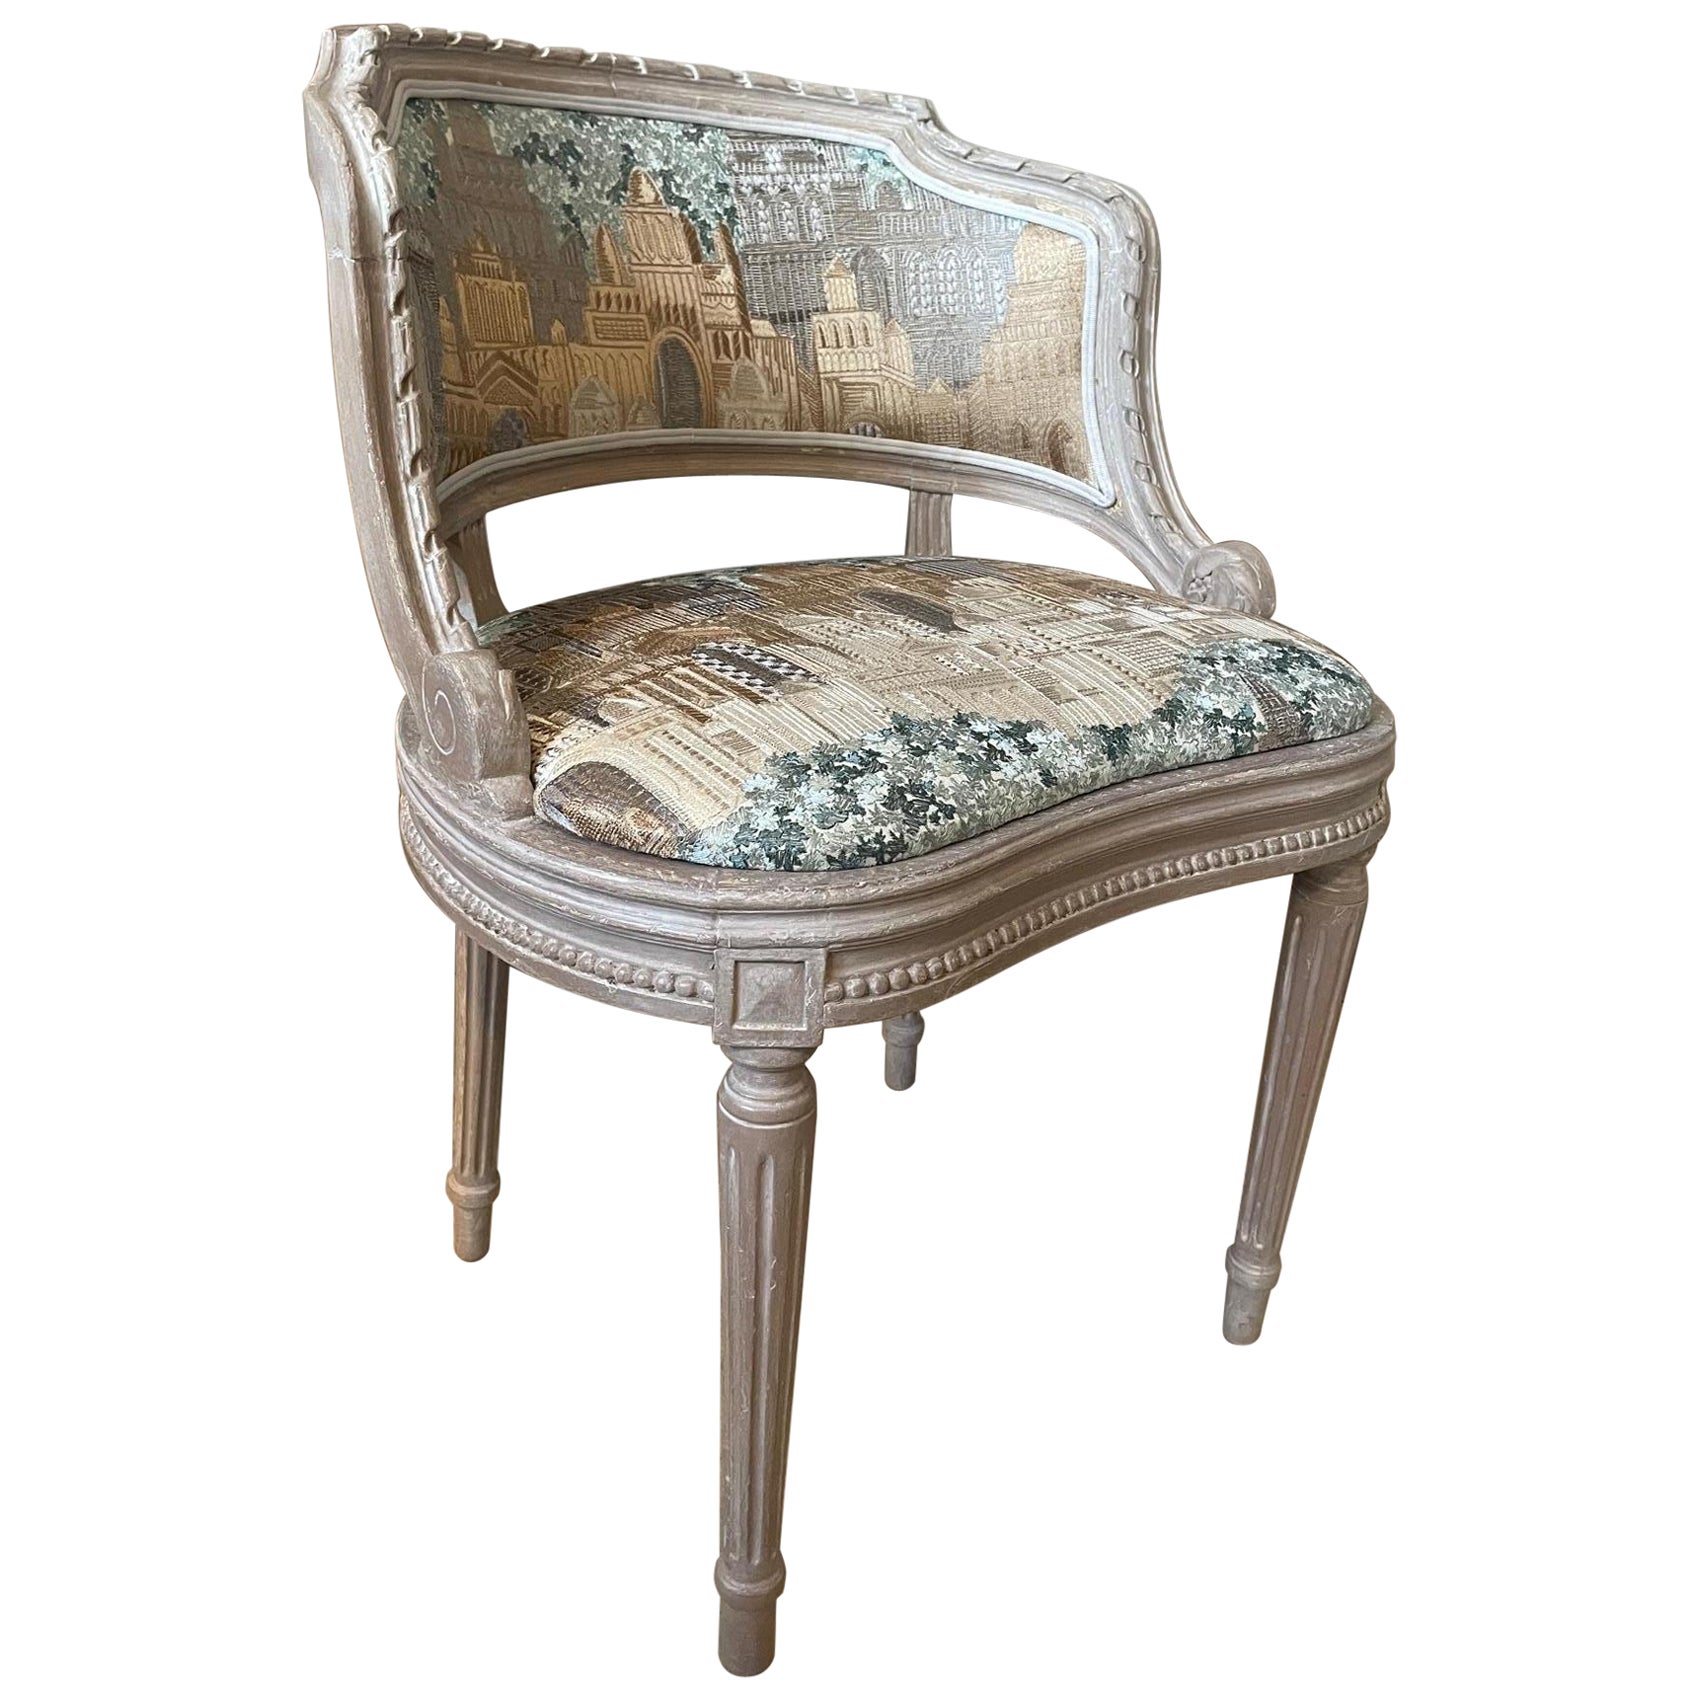 Early 20th Century French Louis XVI Style Reupholstery Chair, 1900s For Sale